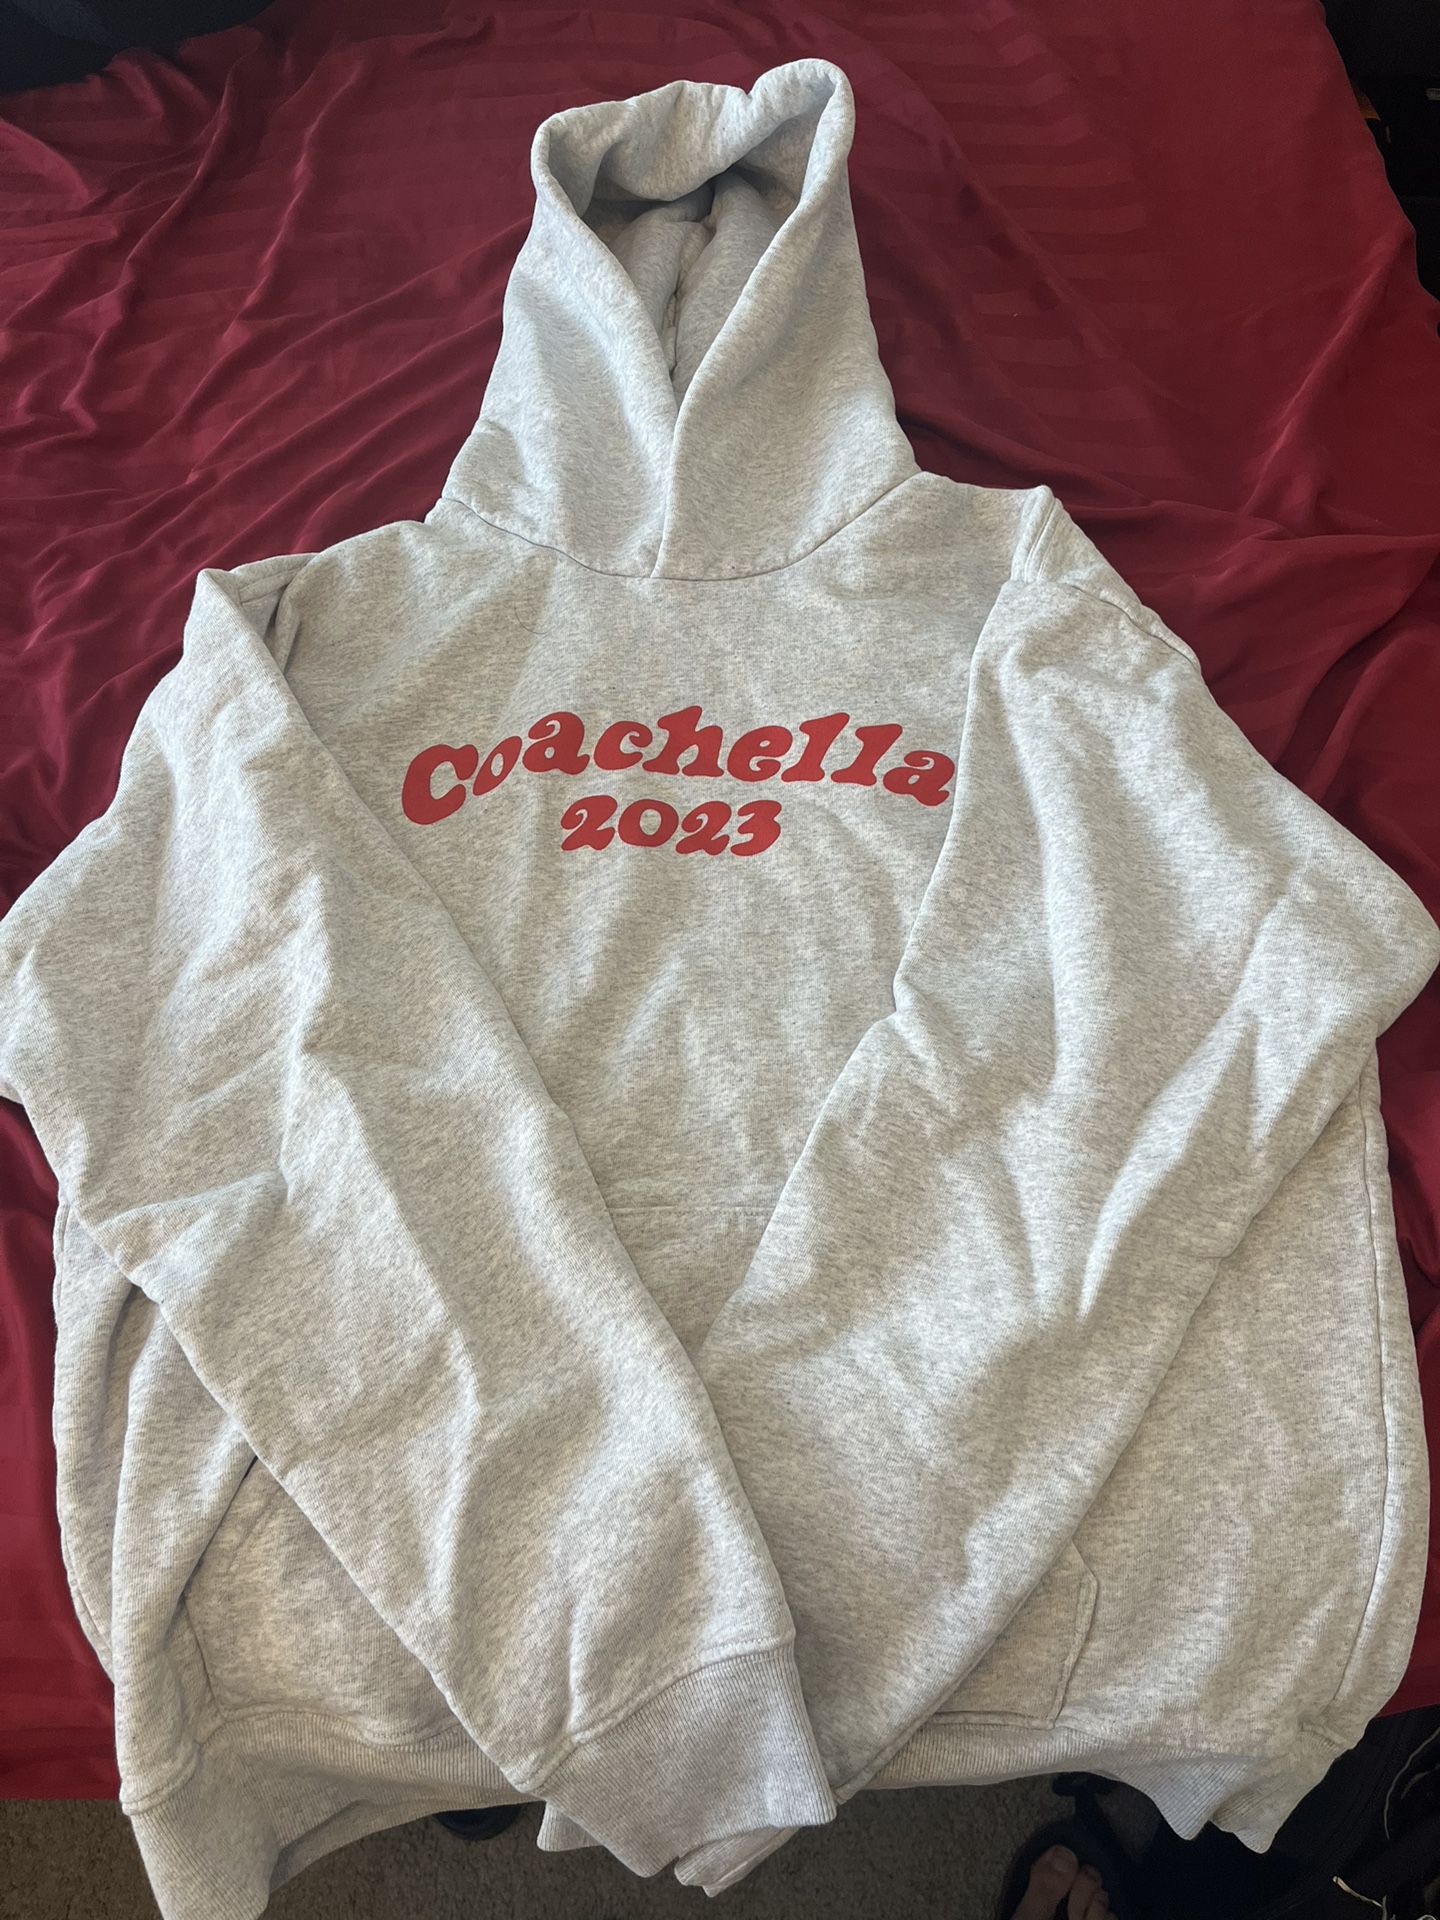 Verdy x Coachella 2023 Girls Don't Cry Hoodie for Sale in San